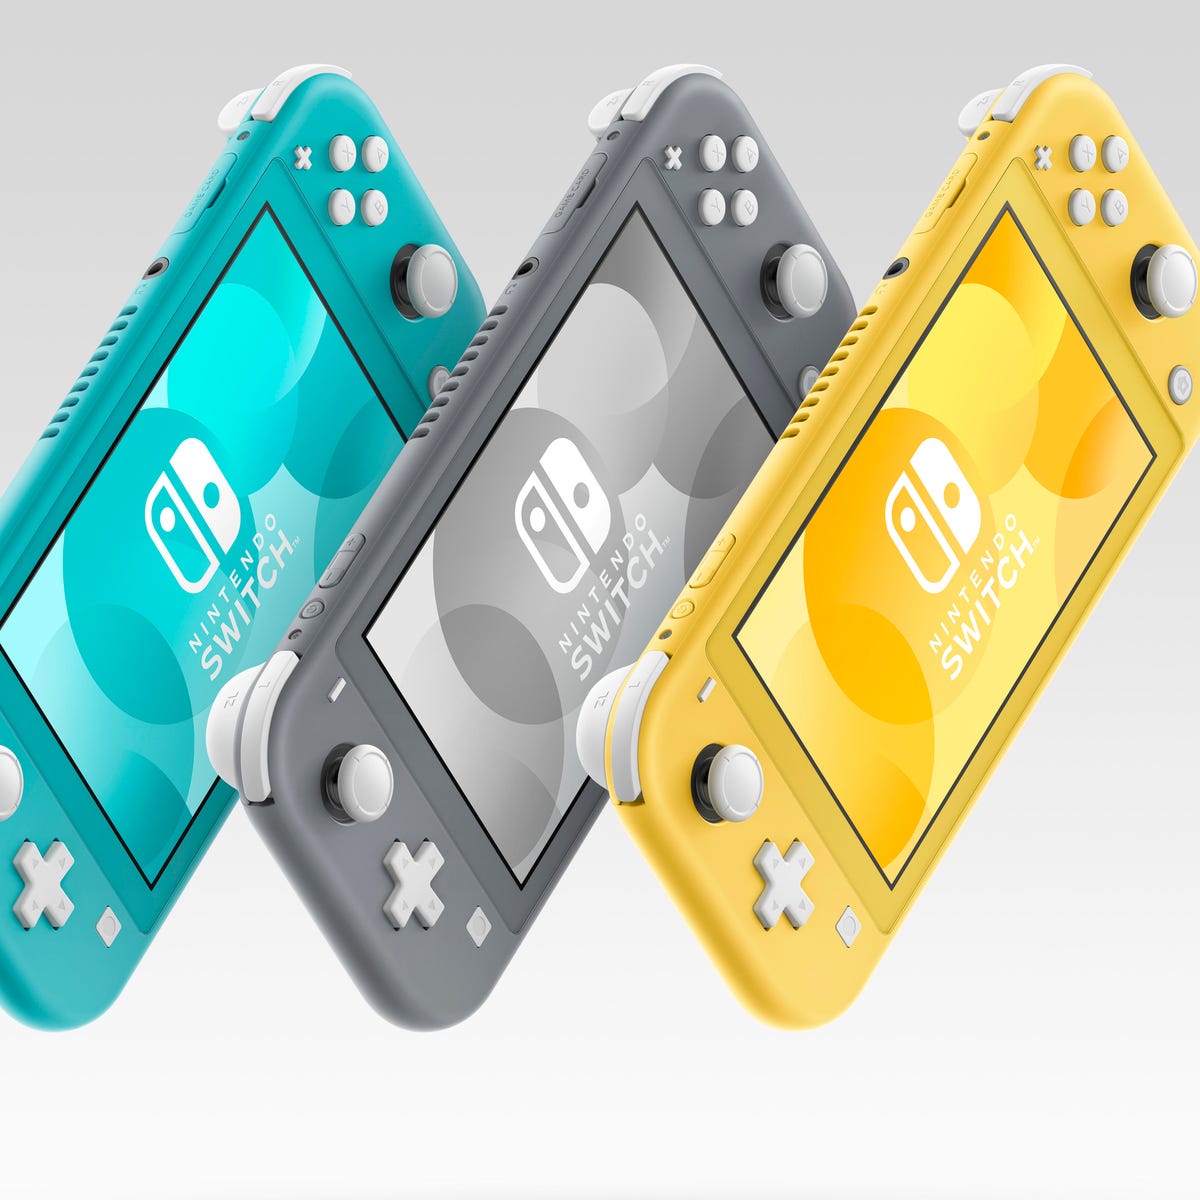 Nintendo Switch Lite is $200 and colorful, but doesn't connect to